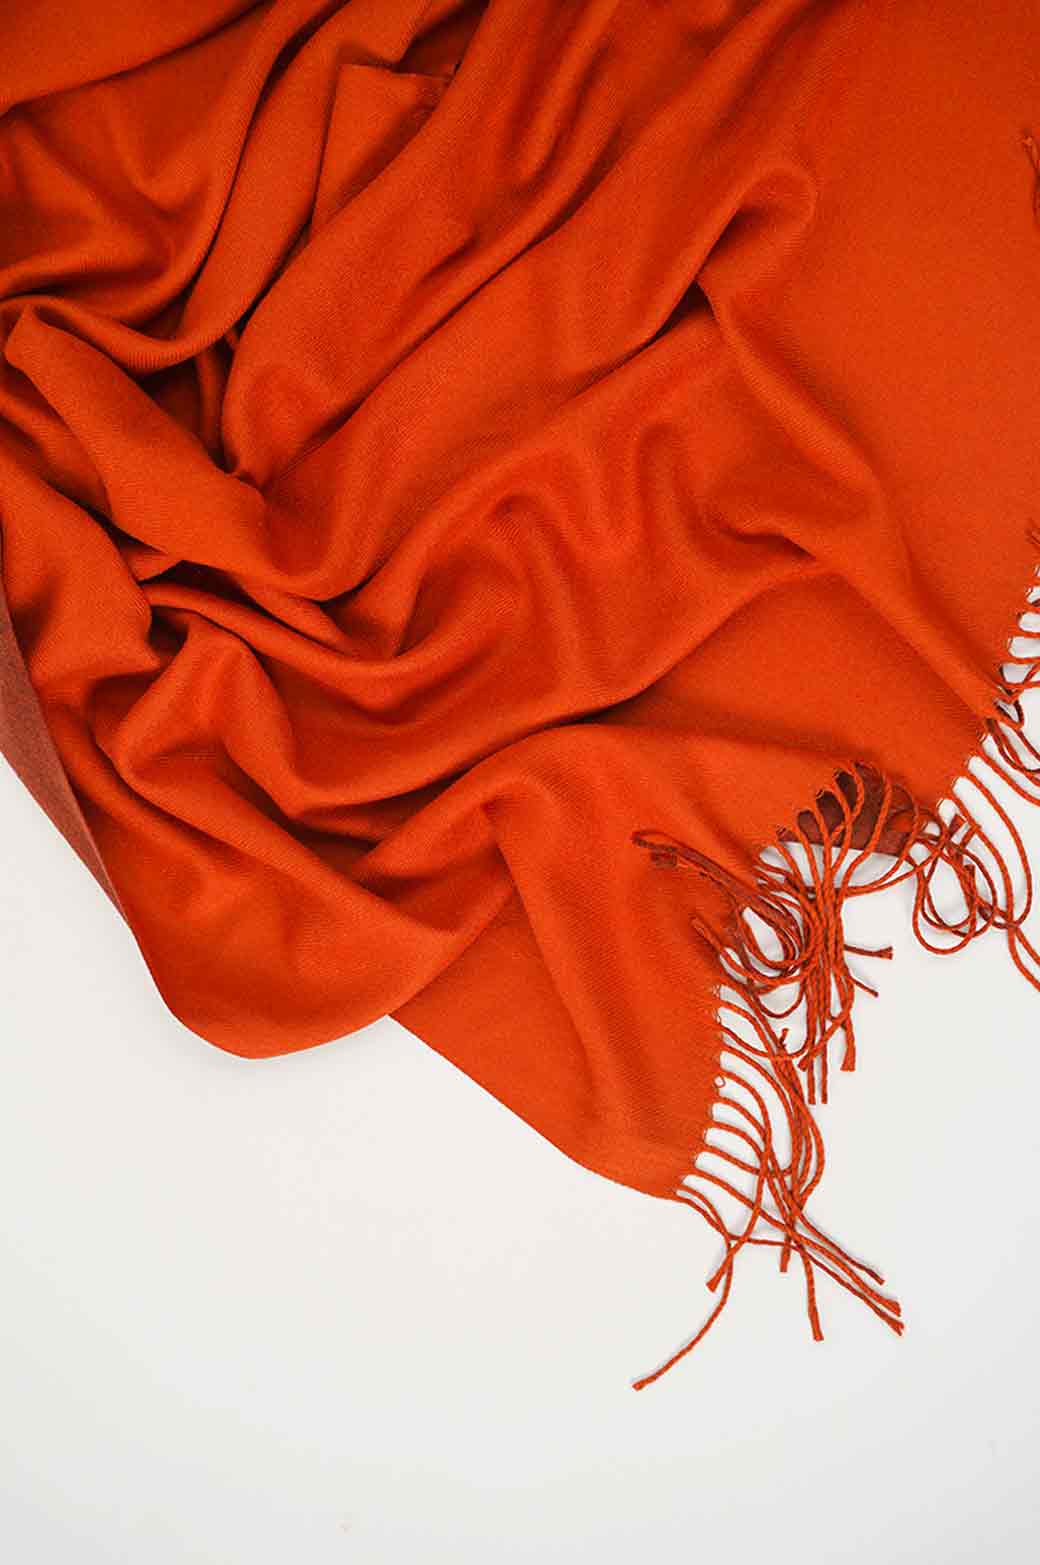 RED RUST TWO-TONE SOFT SCARF